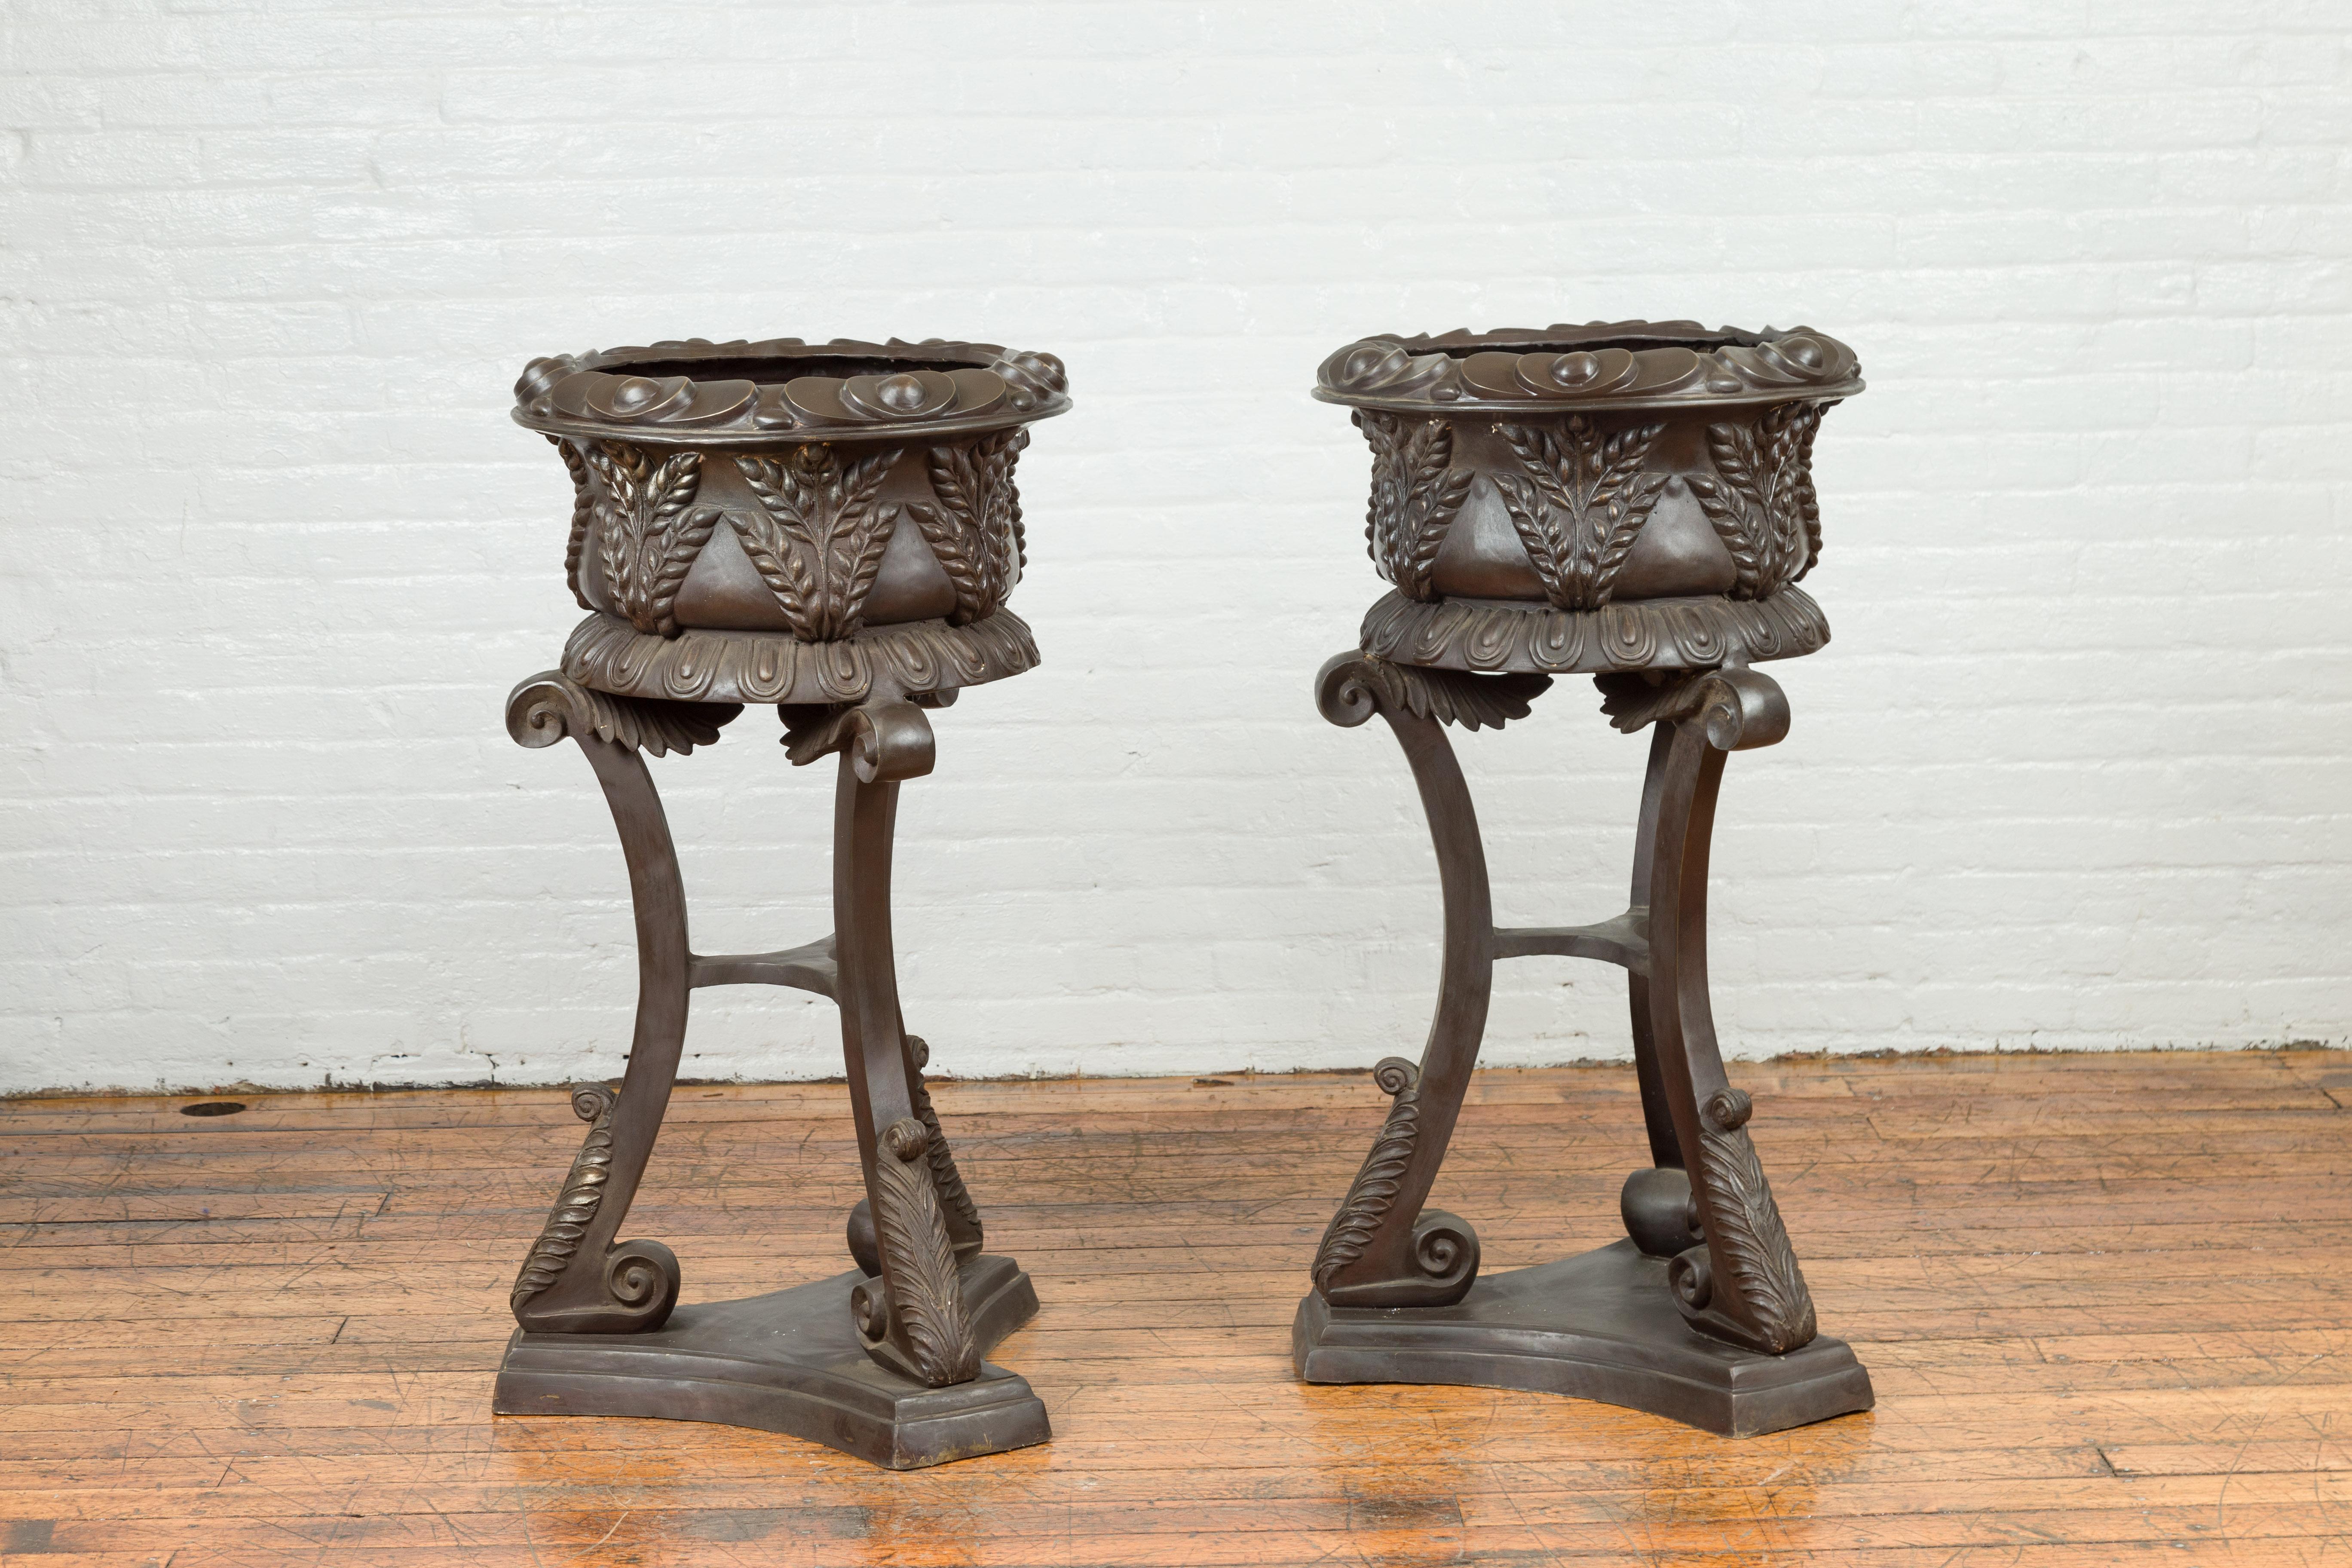 Tall Vintage Bronze European Style Tripod Planter with Raised Floral Motifs For Sale 6